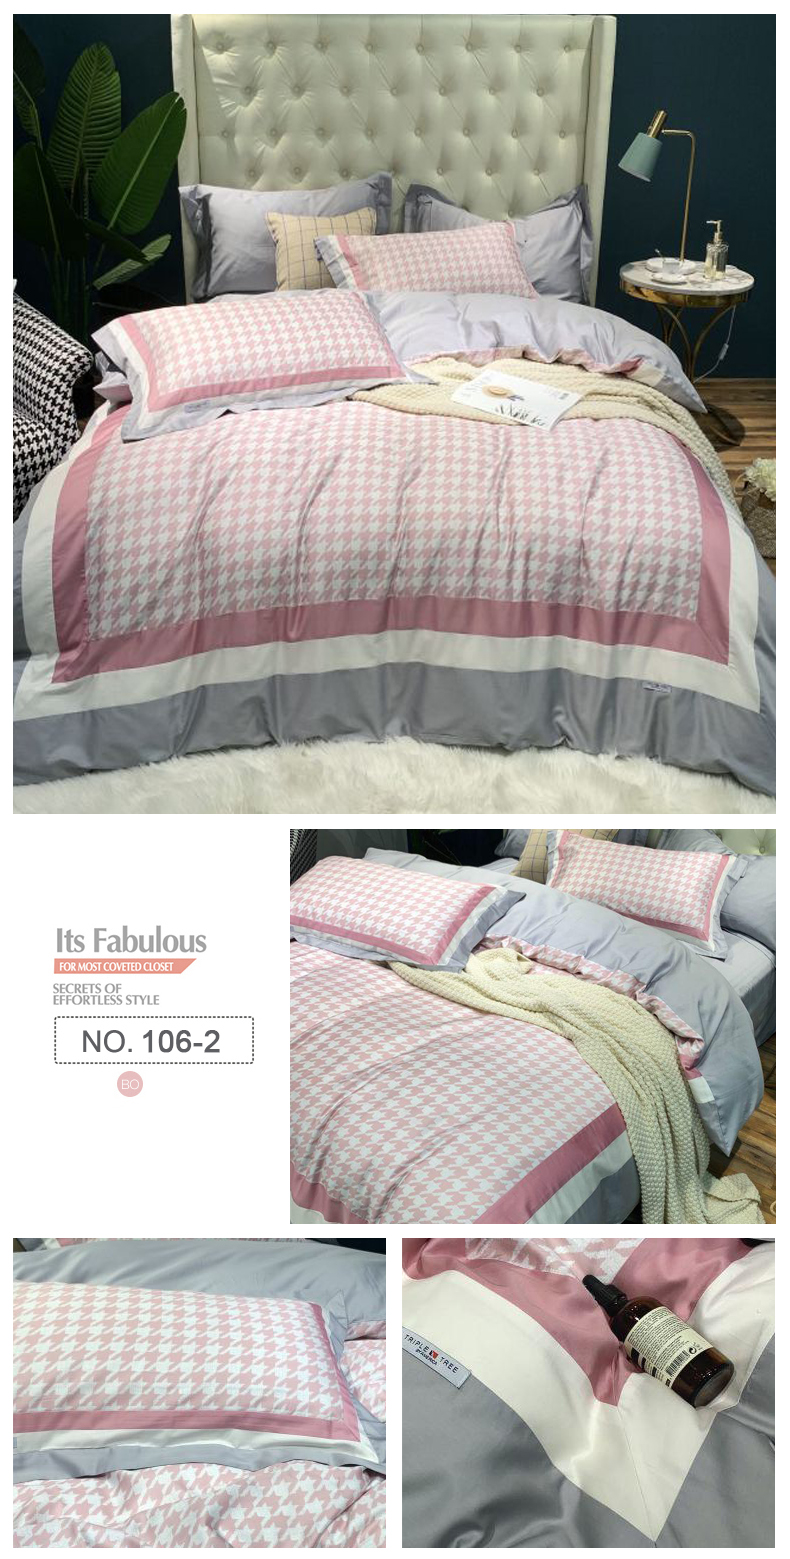 Bed Linen High Quality Comfortable